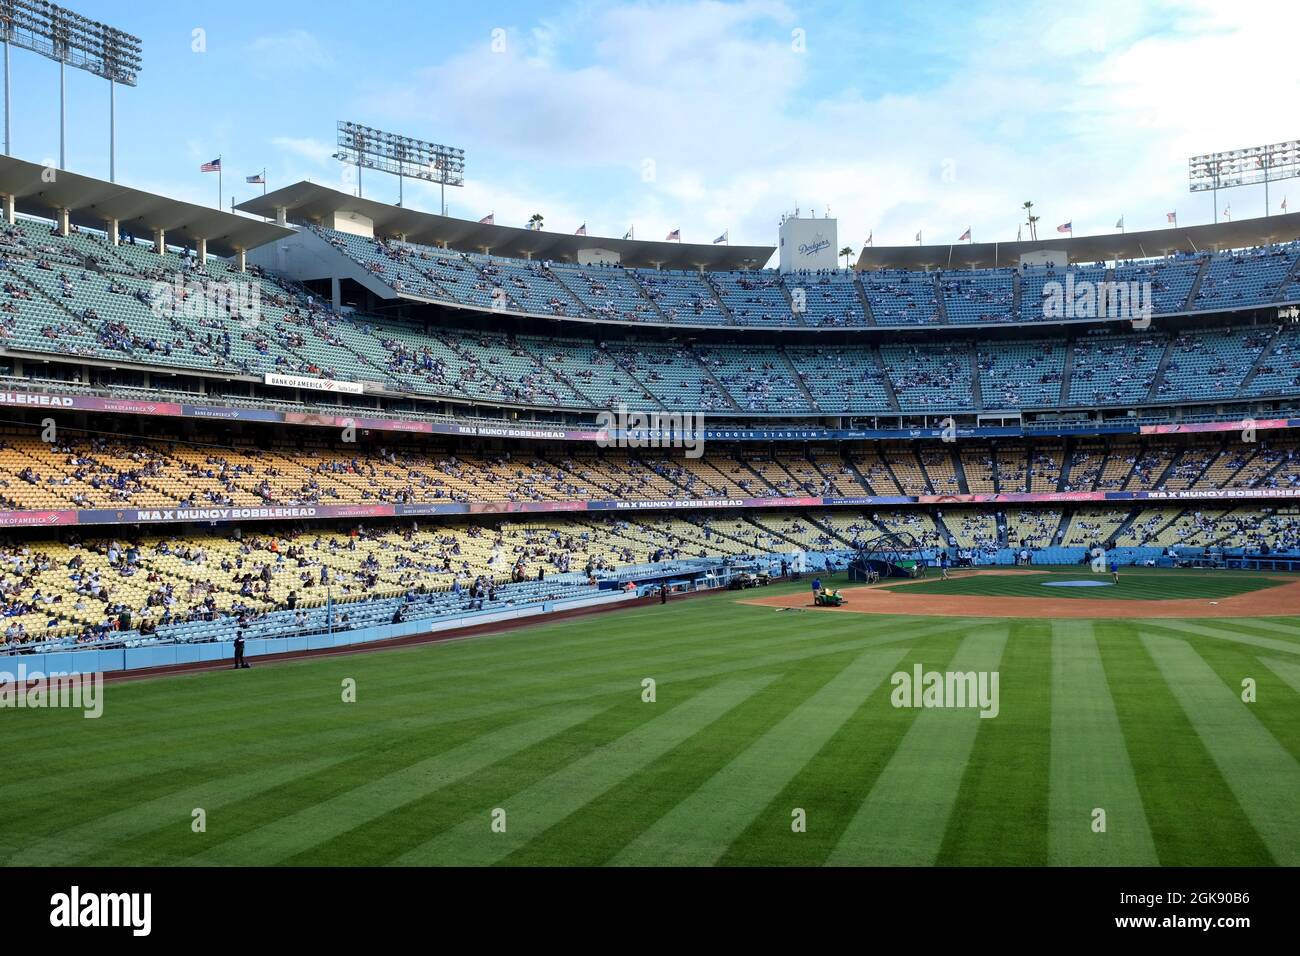 LOS ANGELES, CALIFORNIA, 29 JUNE 2021: Dodger Stadium. Home plate and stands viewed from Right Field, as the grounds crew preps for a a game. Stock Photo